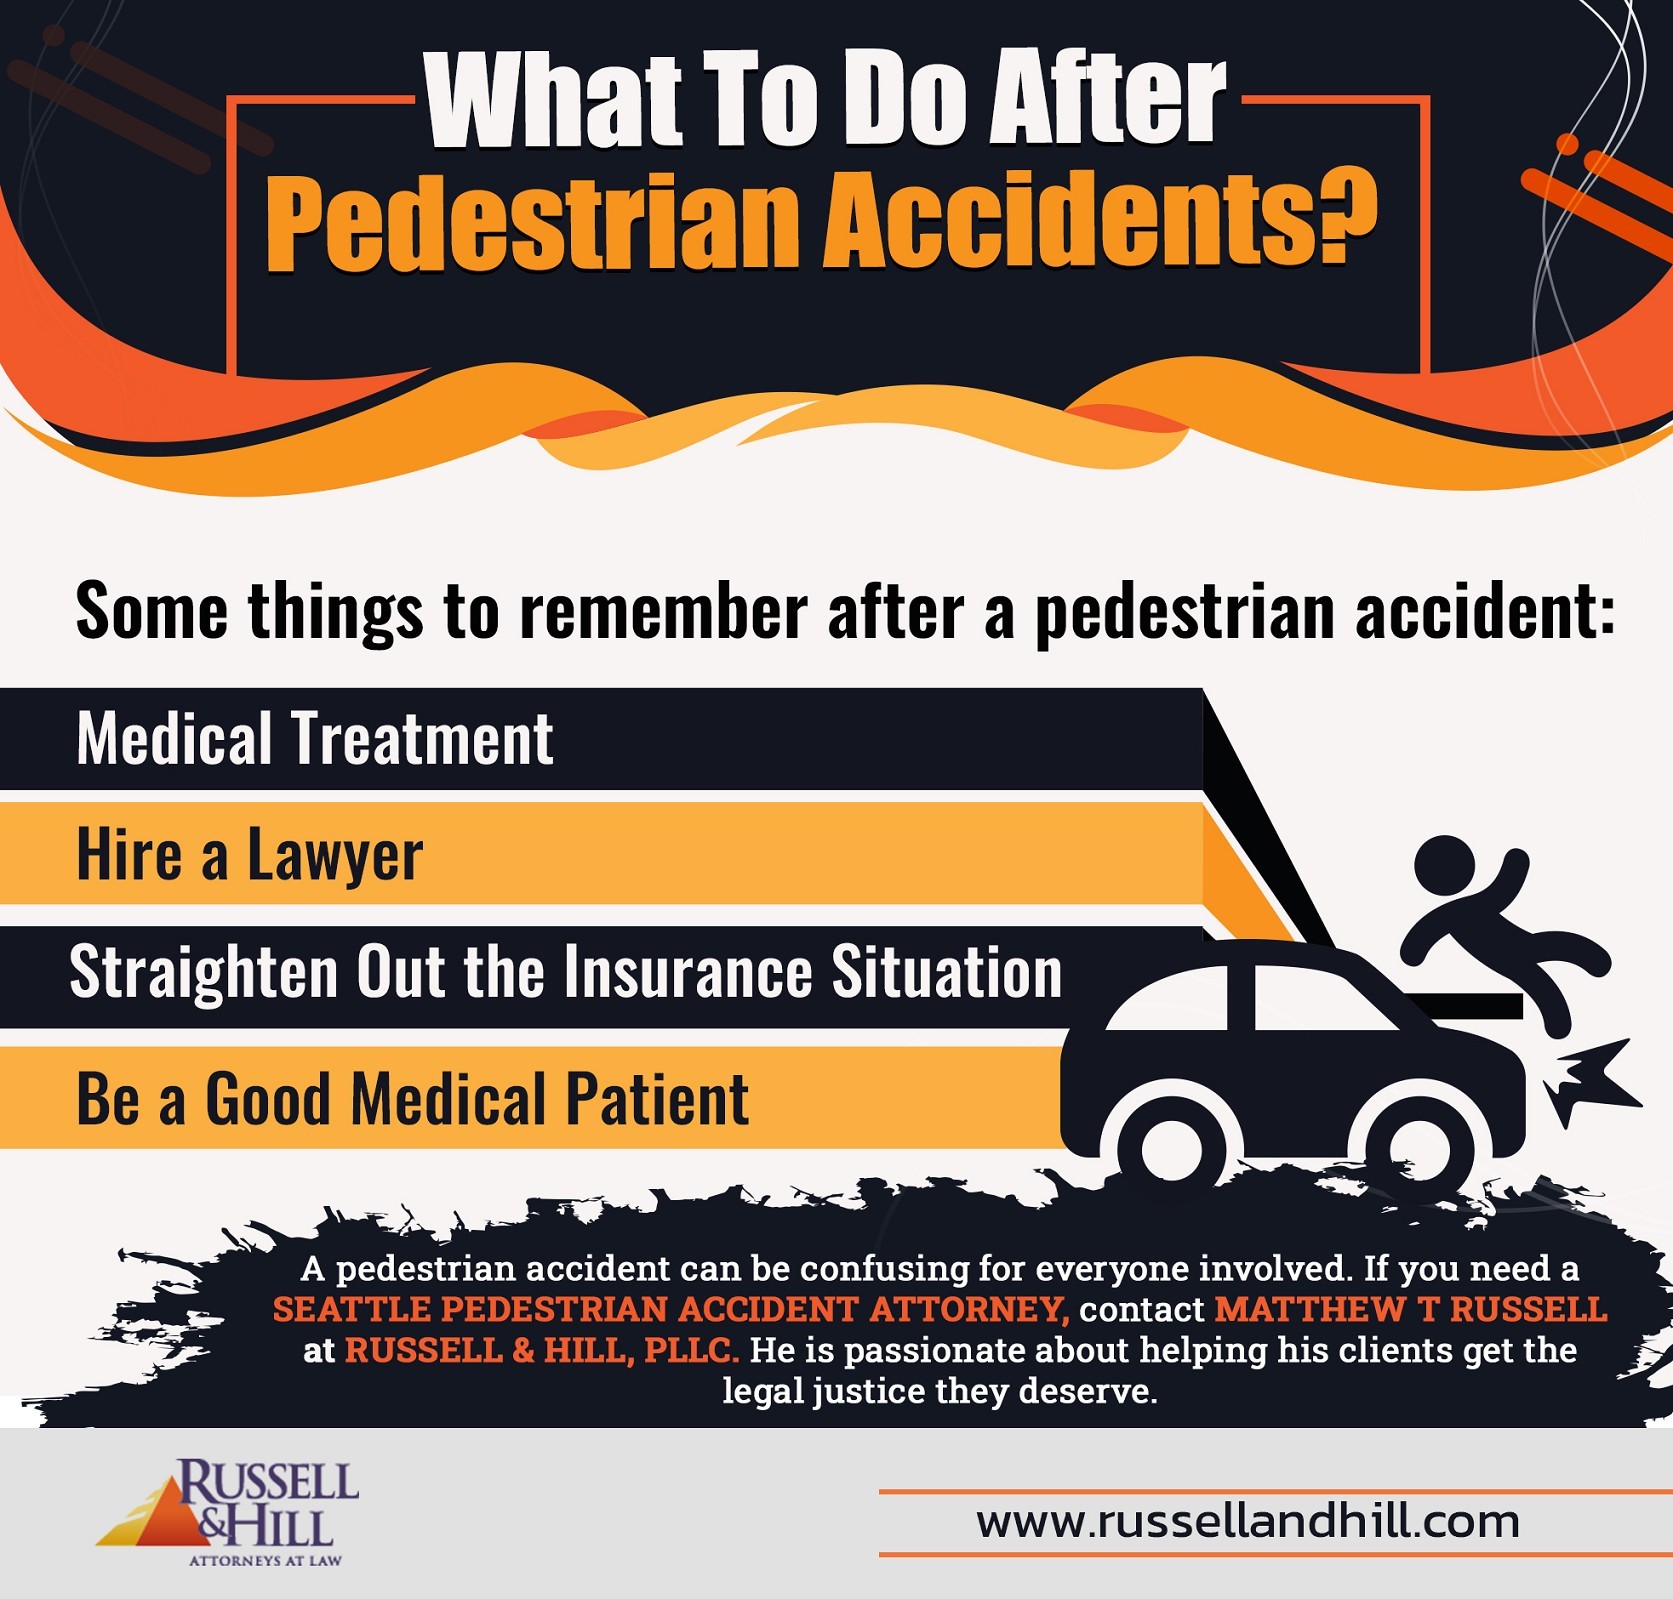 What To Do After Pedestrian Accidents?